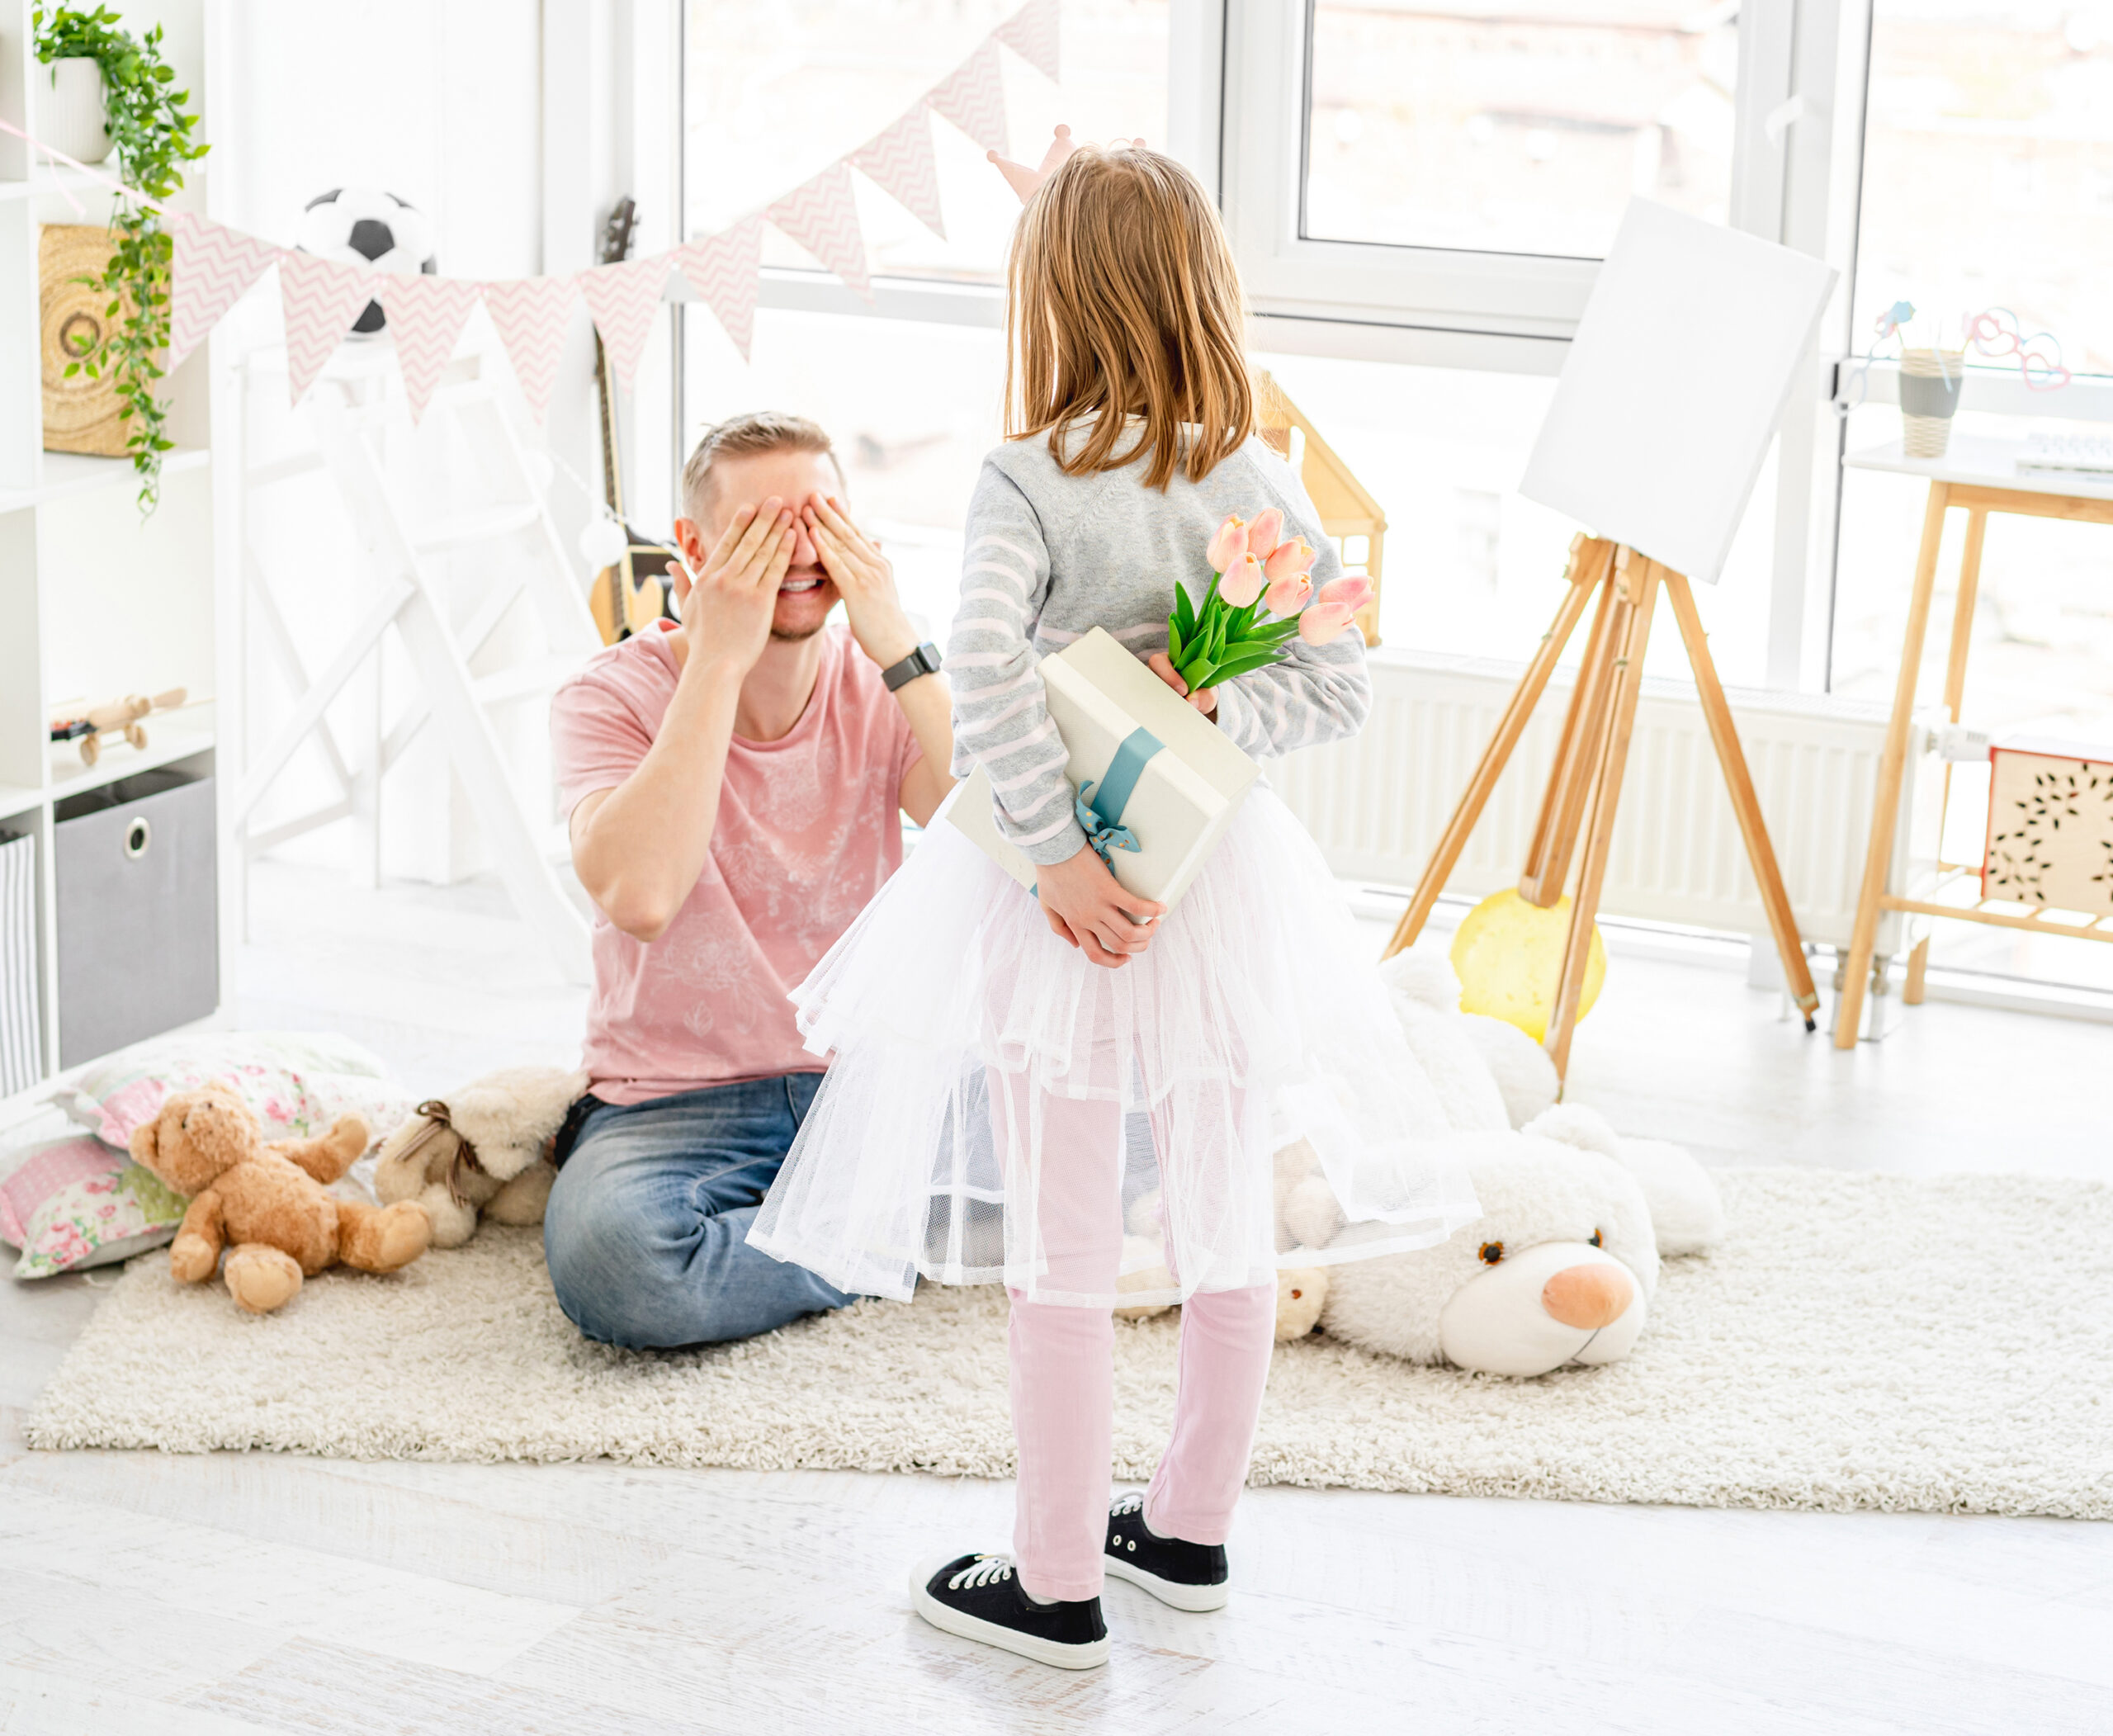 Little girl with gift for excited father in playroom